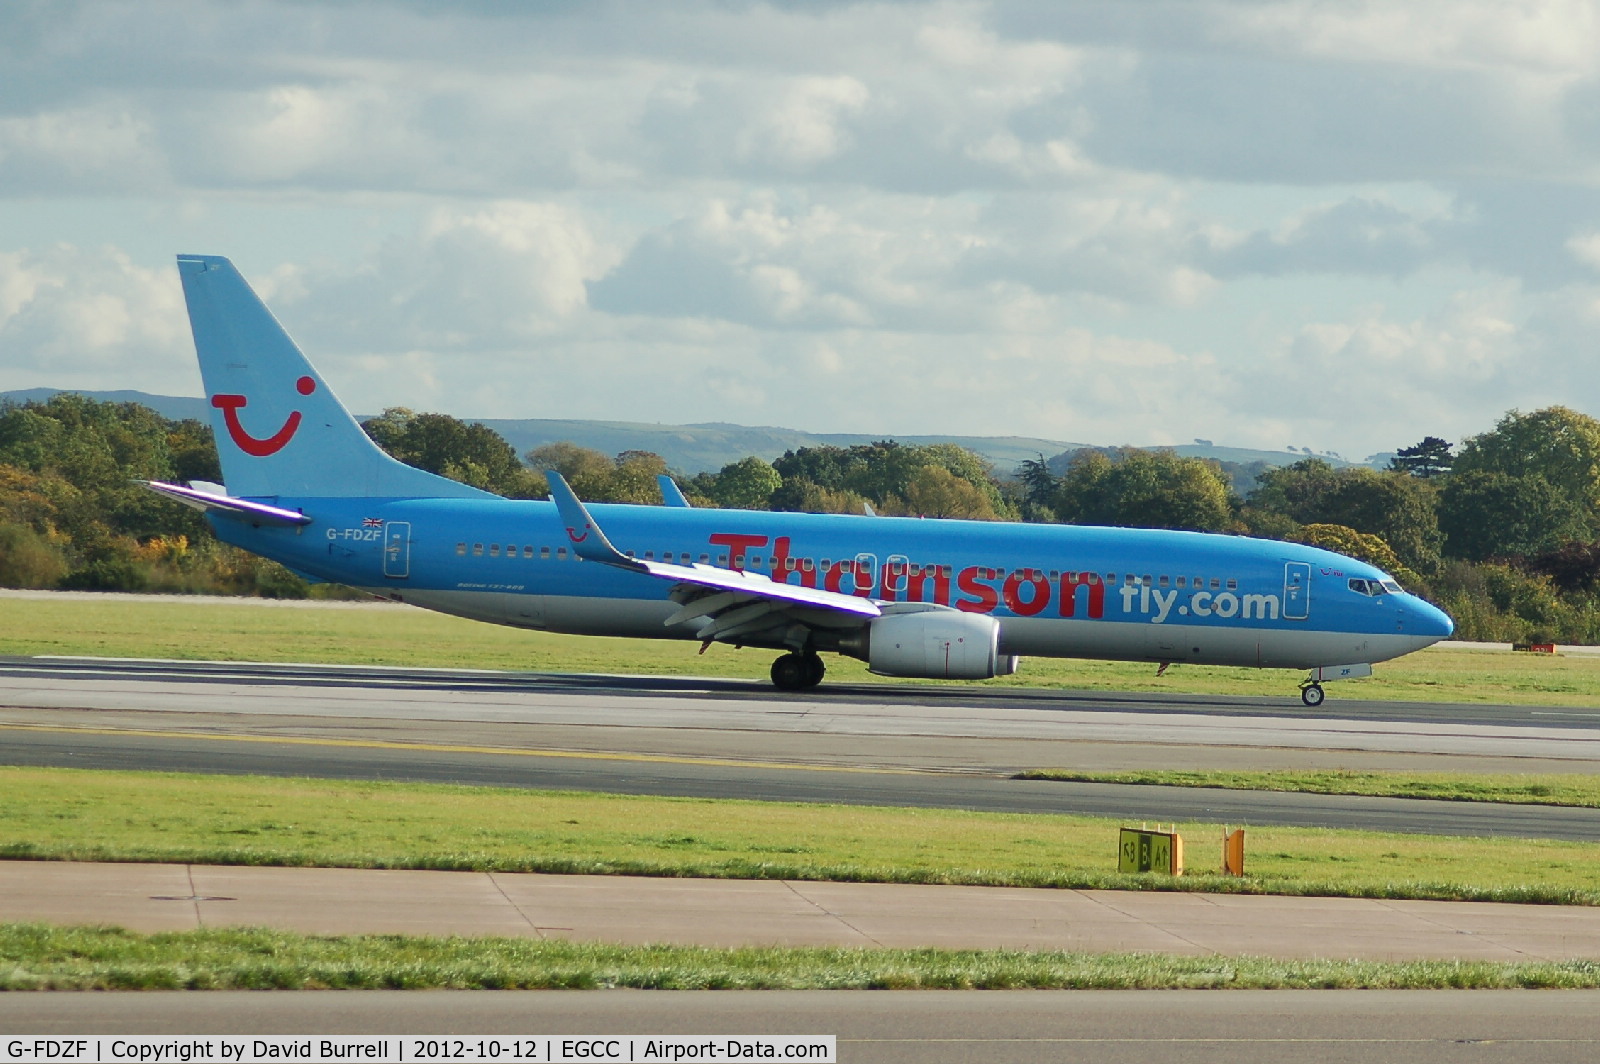 G-FDZF, 2008 Boeing 737-8K5 C/N 35138, Thomson Boeing 737 G-FDZF landed at Manchester Airport.